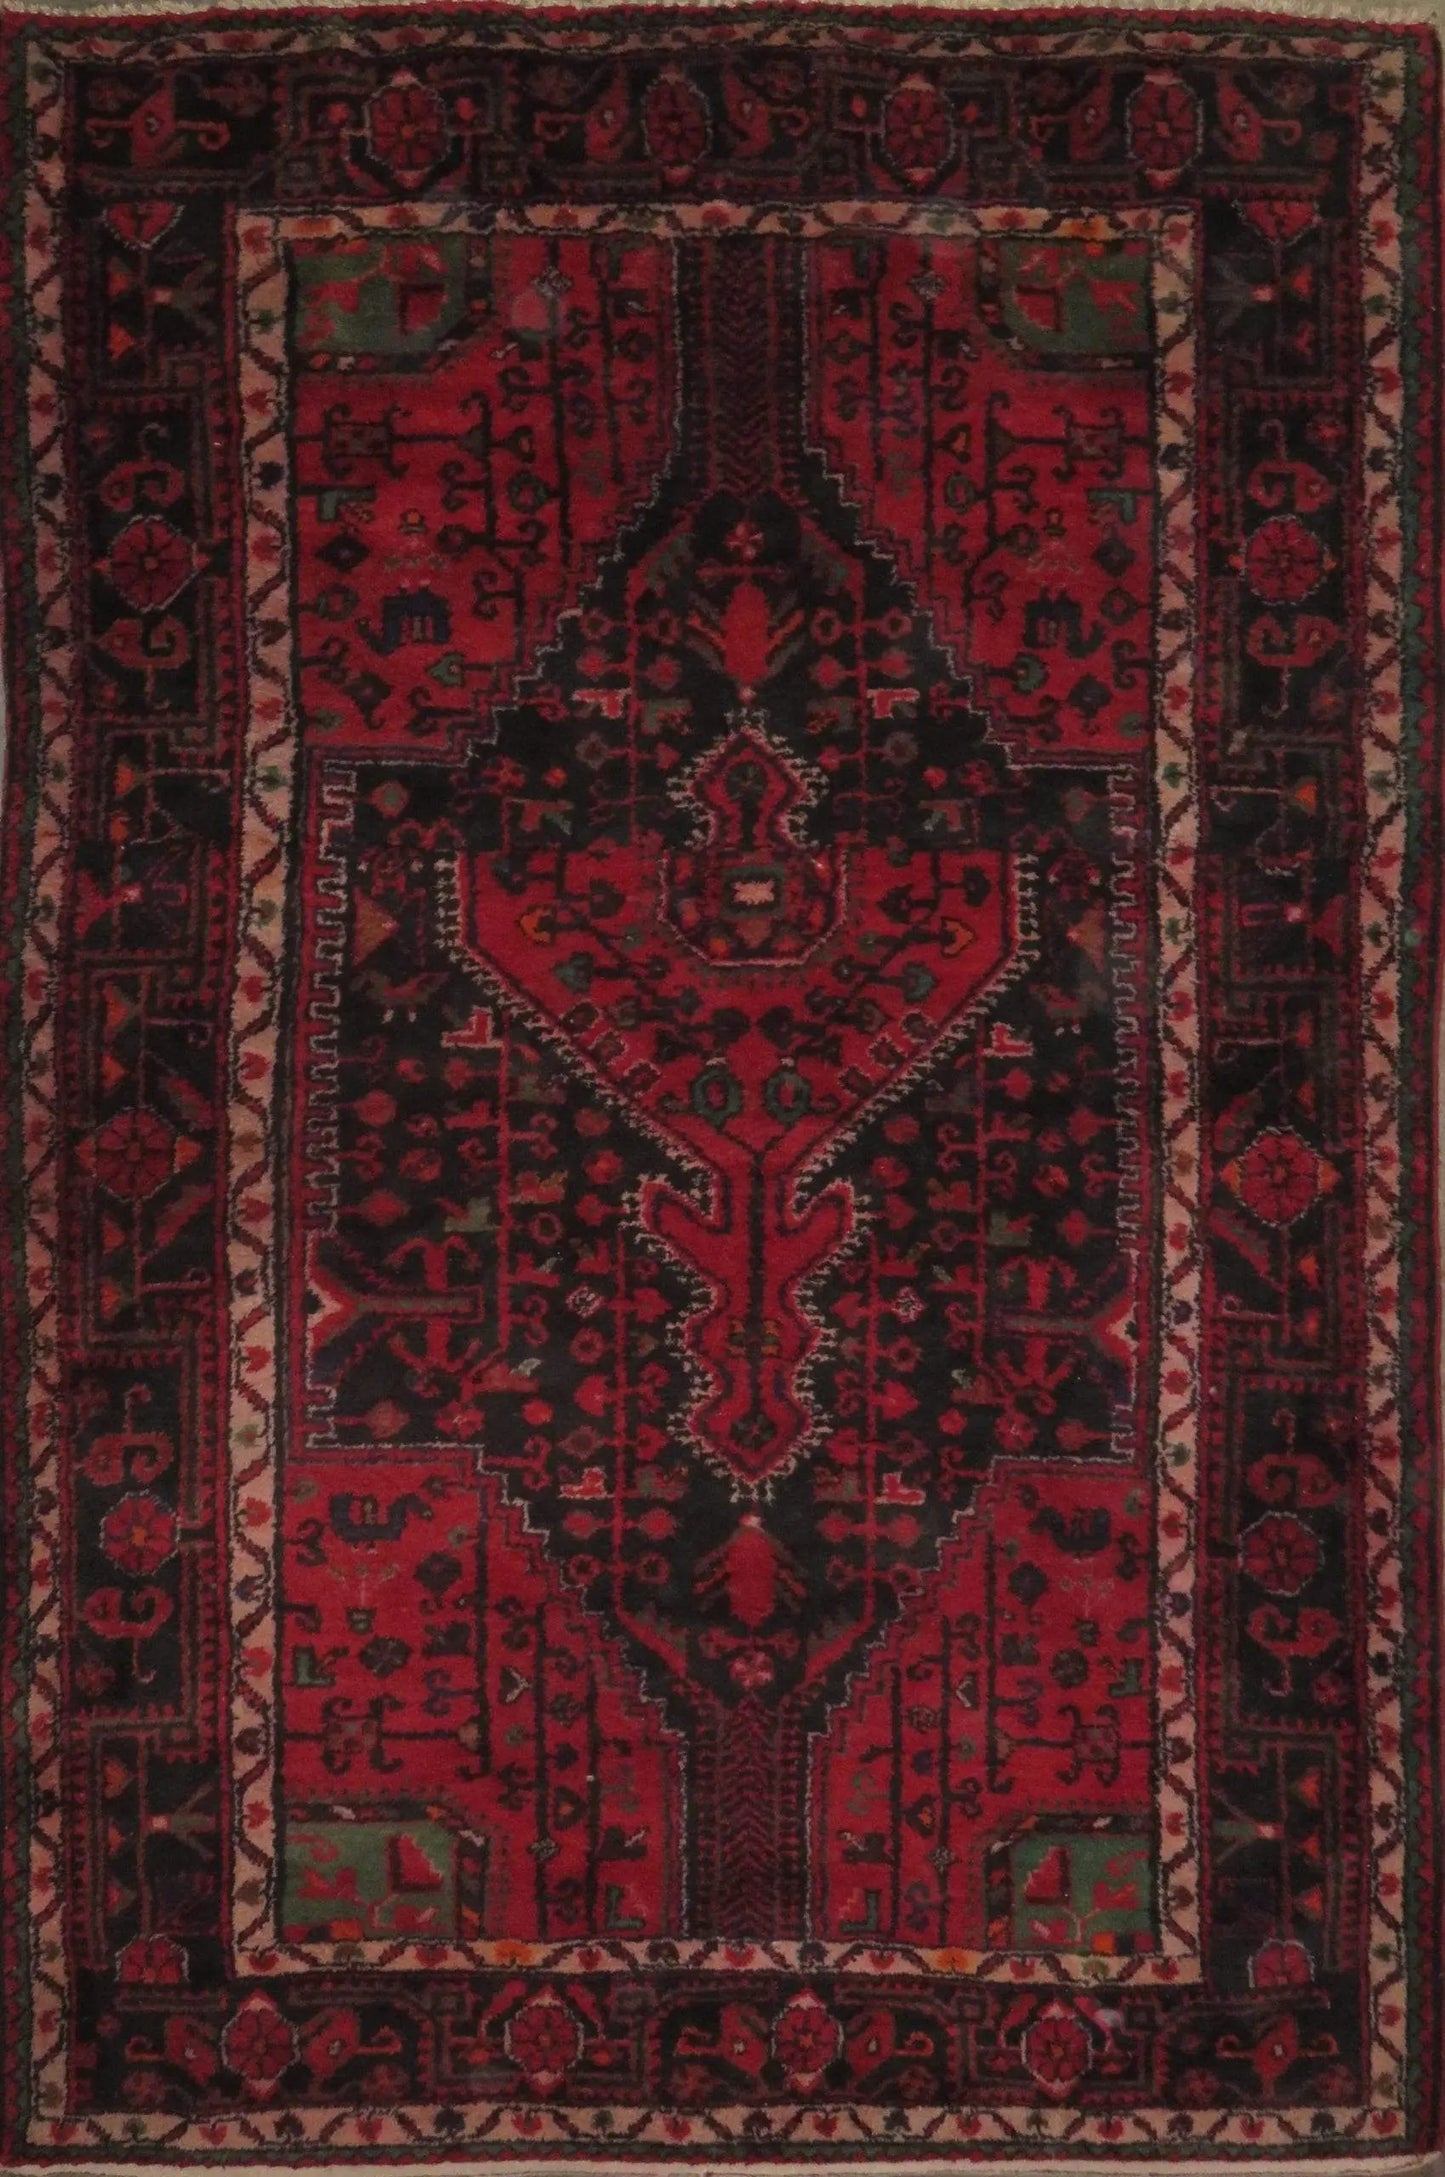 Hand-Knotted Persian Wool Rug _ Luxurious Vintage Design, 7'7" x 4'8", Artisan Crafted